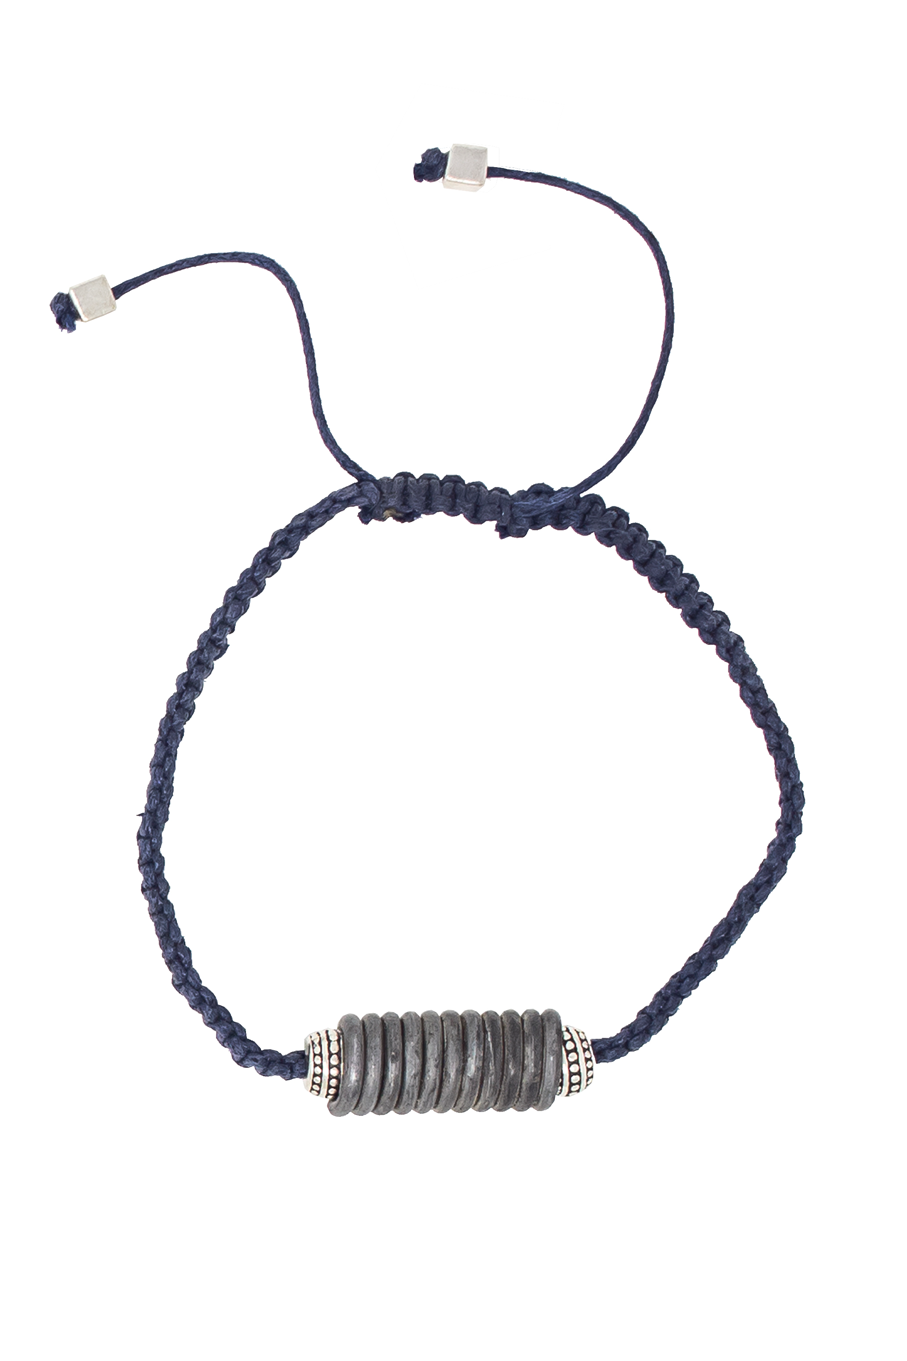 Snare and cord bracelet